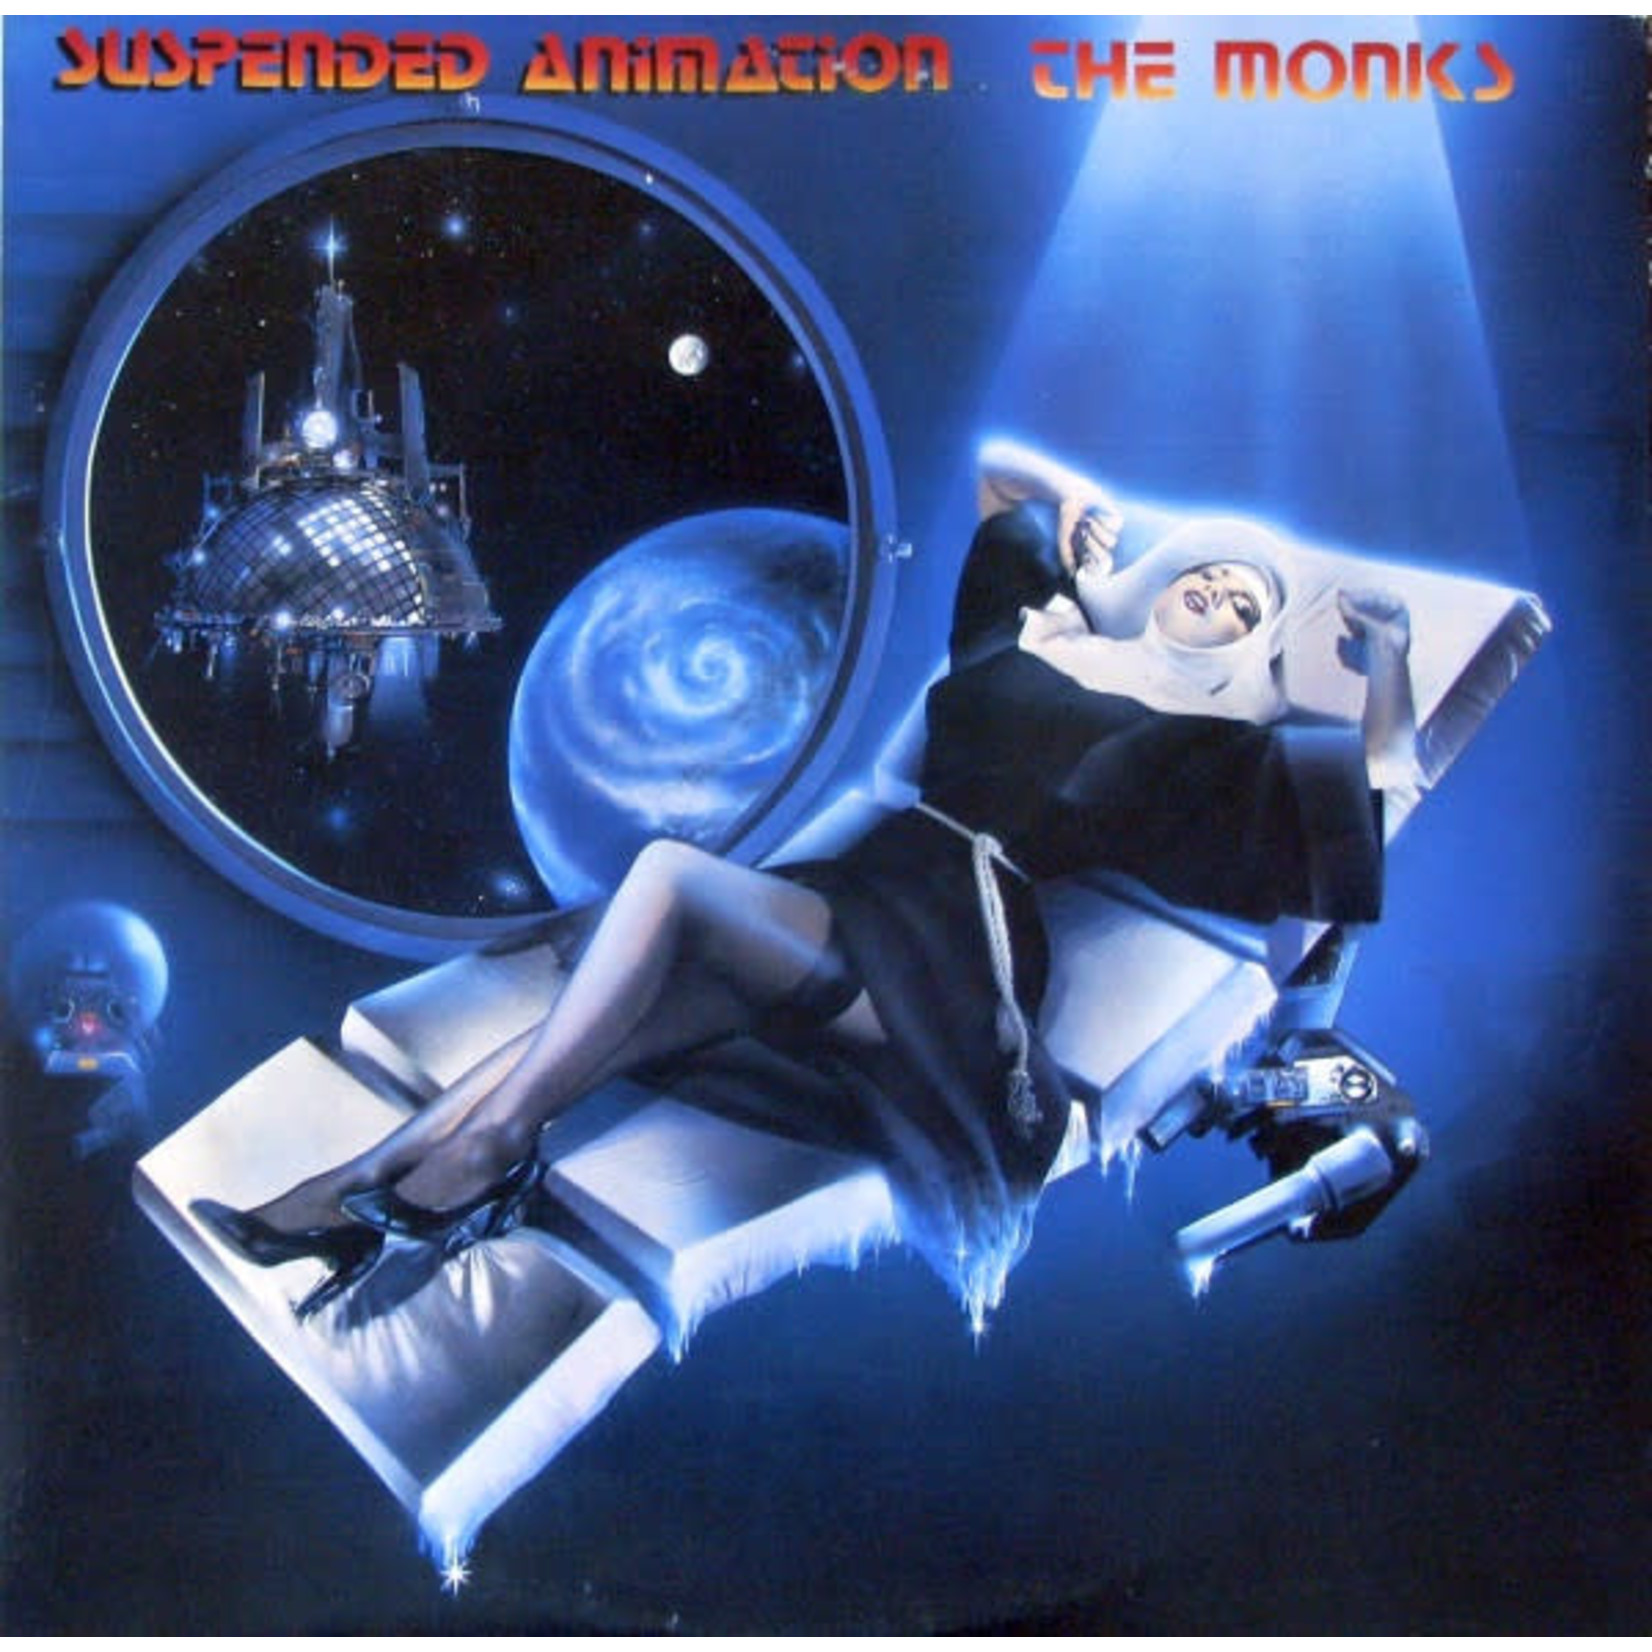 The Monks The Monks – Suspended Animation (LP, PDS-1-6314, VG)